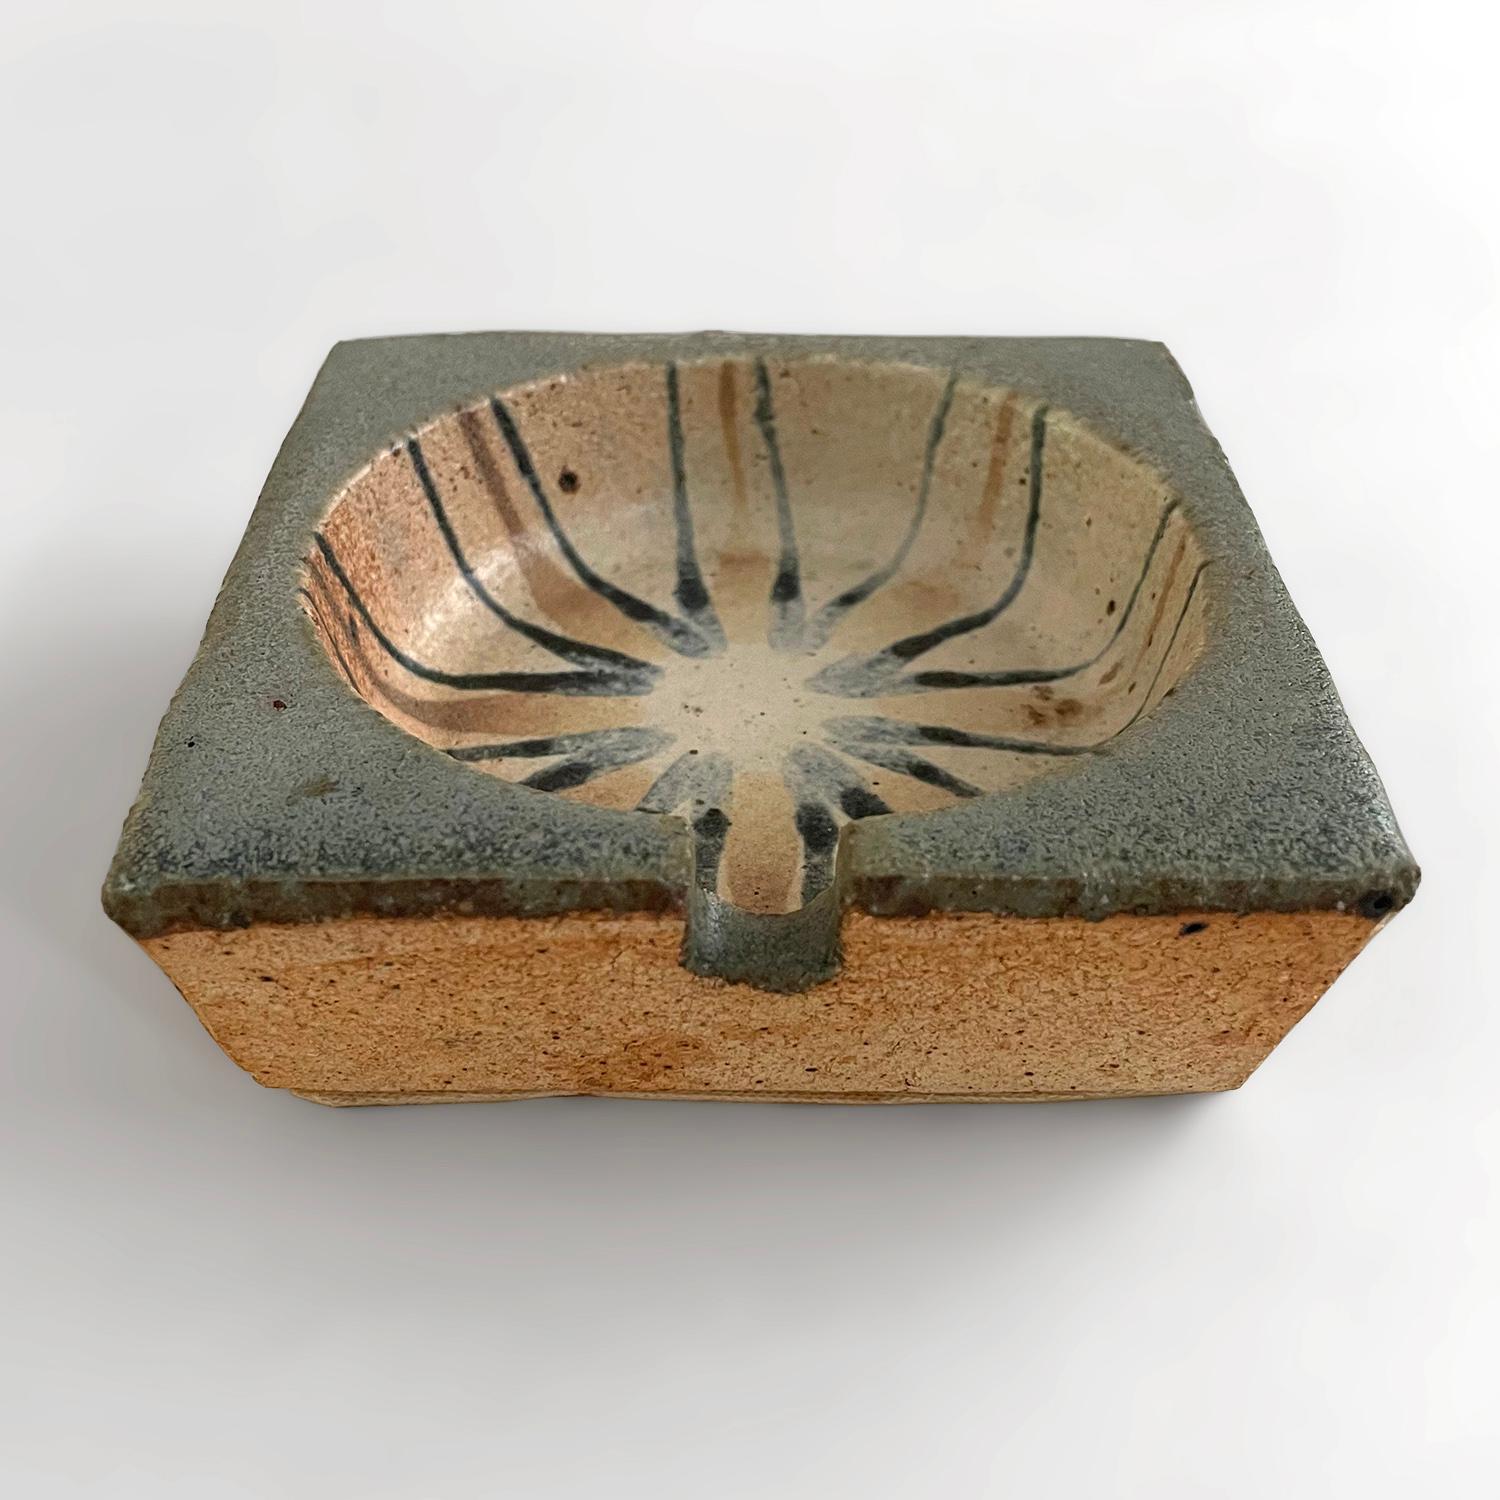 1970’s stoneware ashtray
France, circa 1970’s
This handmade piece has a wonderful organic composition and feel
Neutral toned stoneware decorated with a free form orbital sun pattern and multi layered two toned accents
Patina from age and